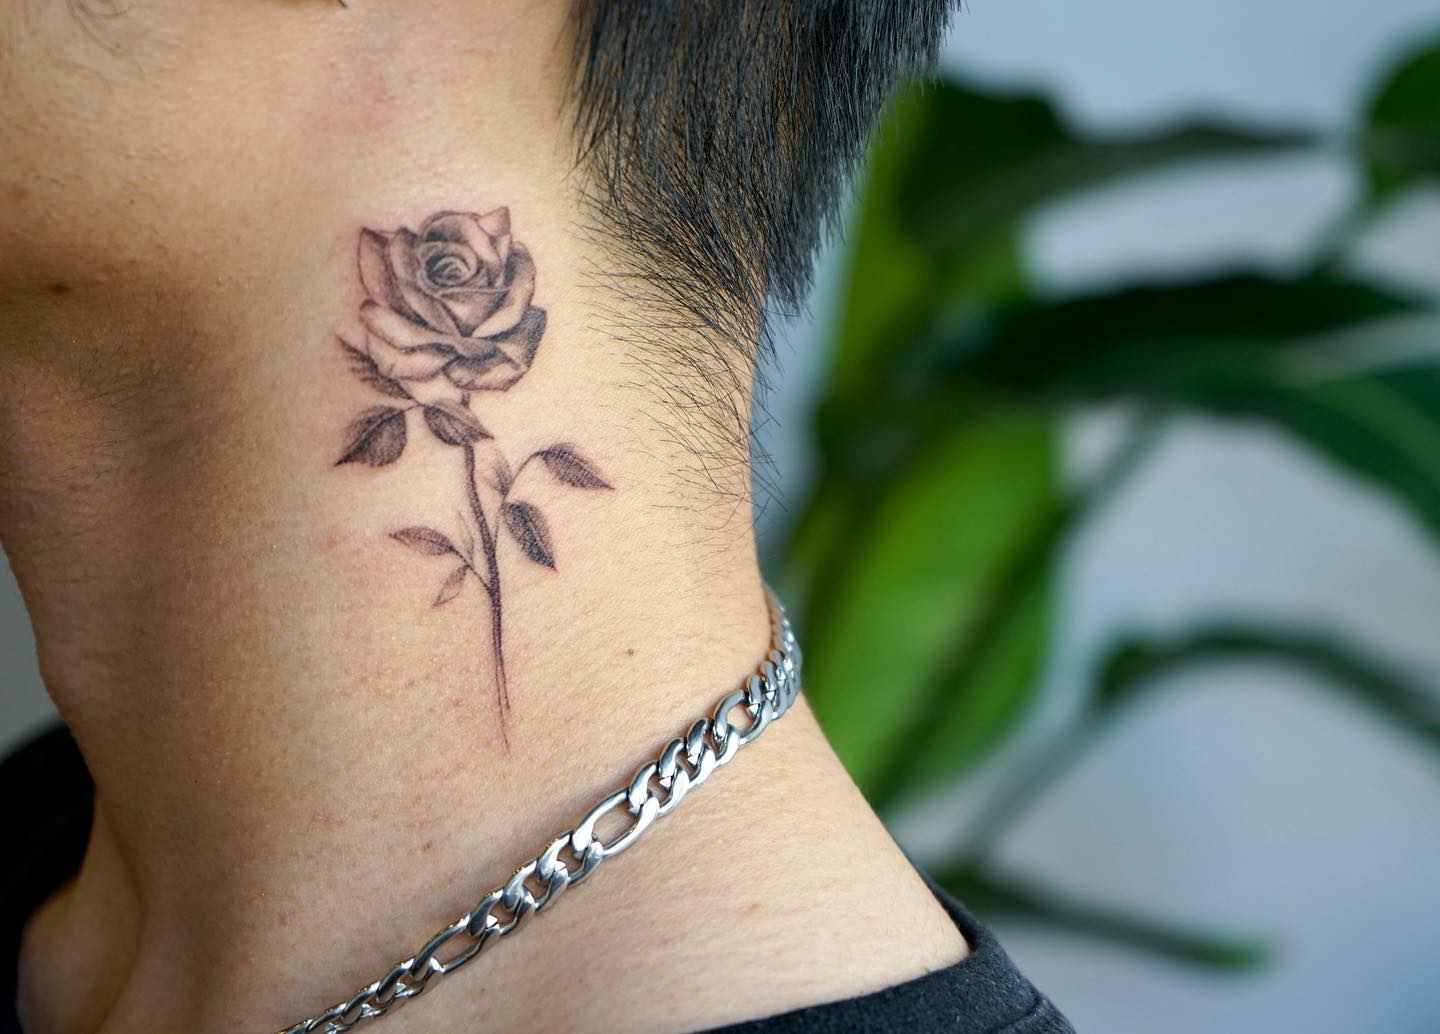 Manly Rose Tattoo with Thorns - wide 1